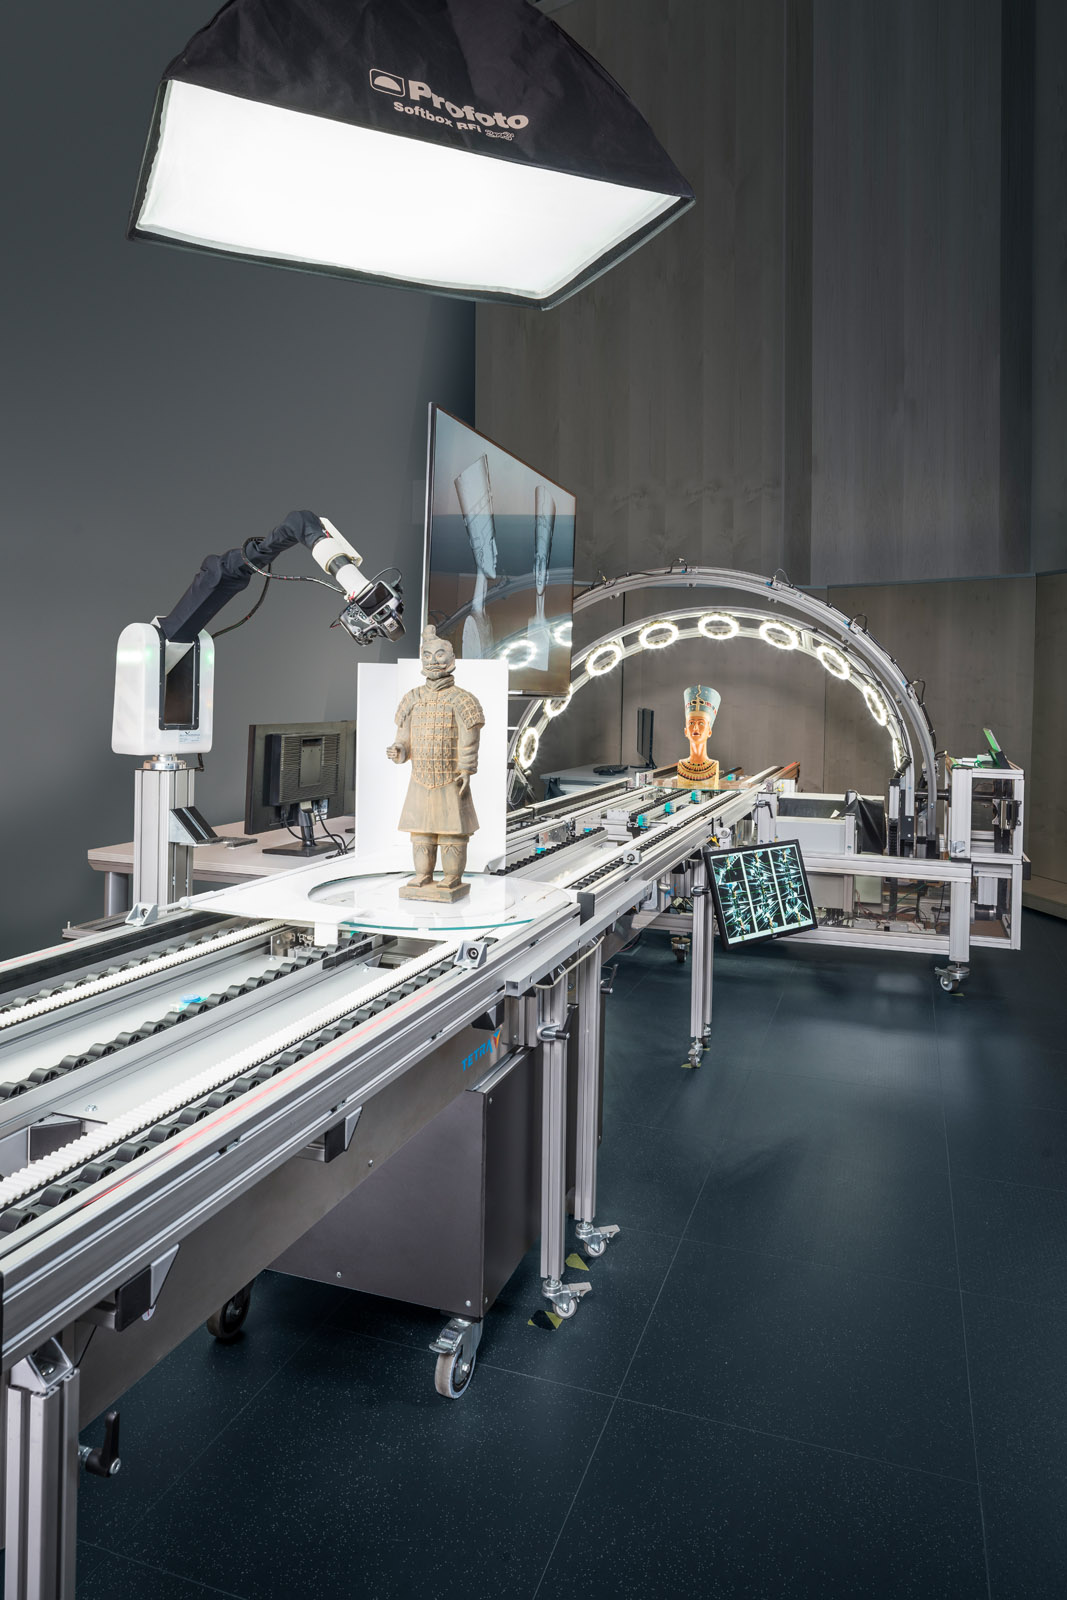 CultLab3D: The scanning facility, which received an EU Prize for Cultural Heritage / Europa Nostra Award 2018, digitizes artifacts of different sizes in a fully automated process, scanning both geometry and texture as well as optical material properties to generate a faithful representation with micrometer accuracy. 